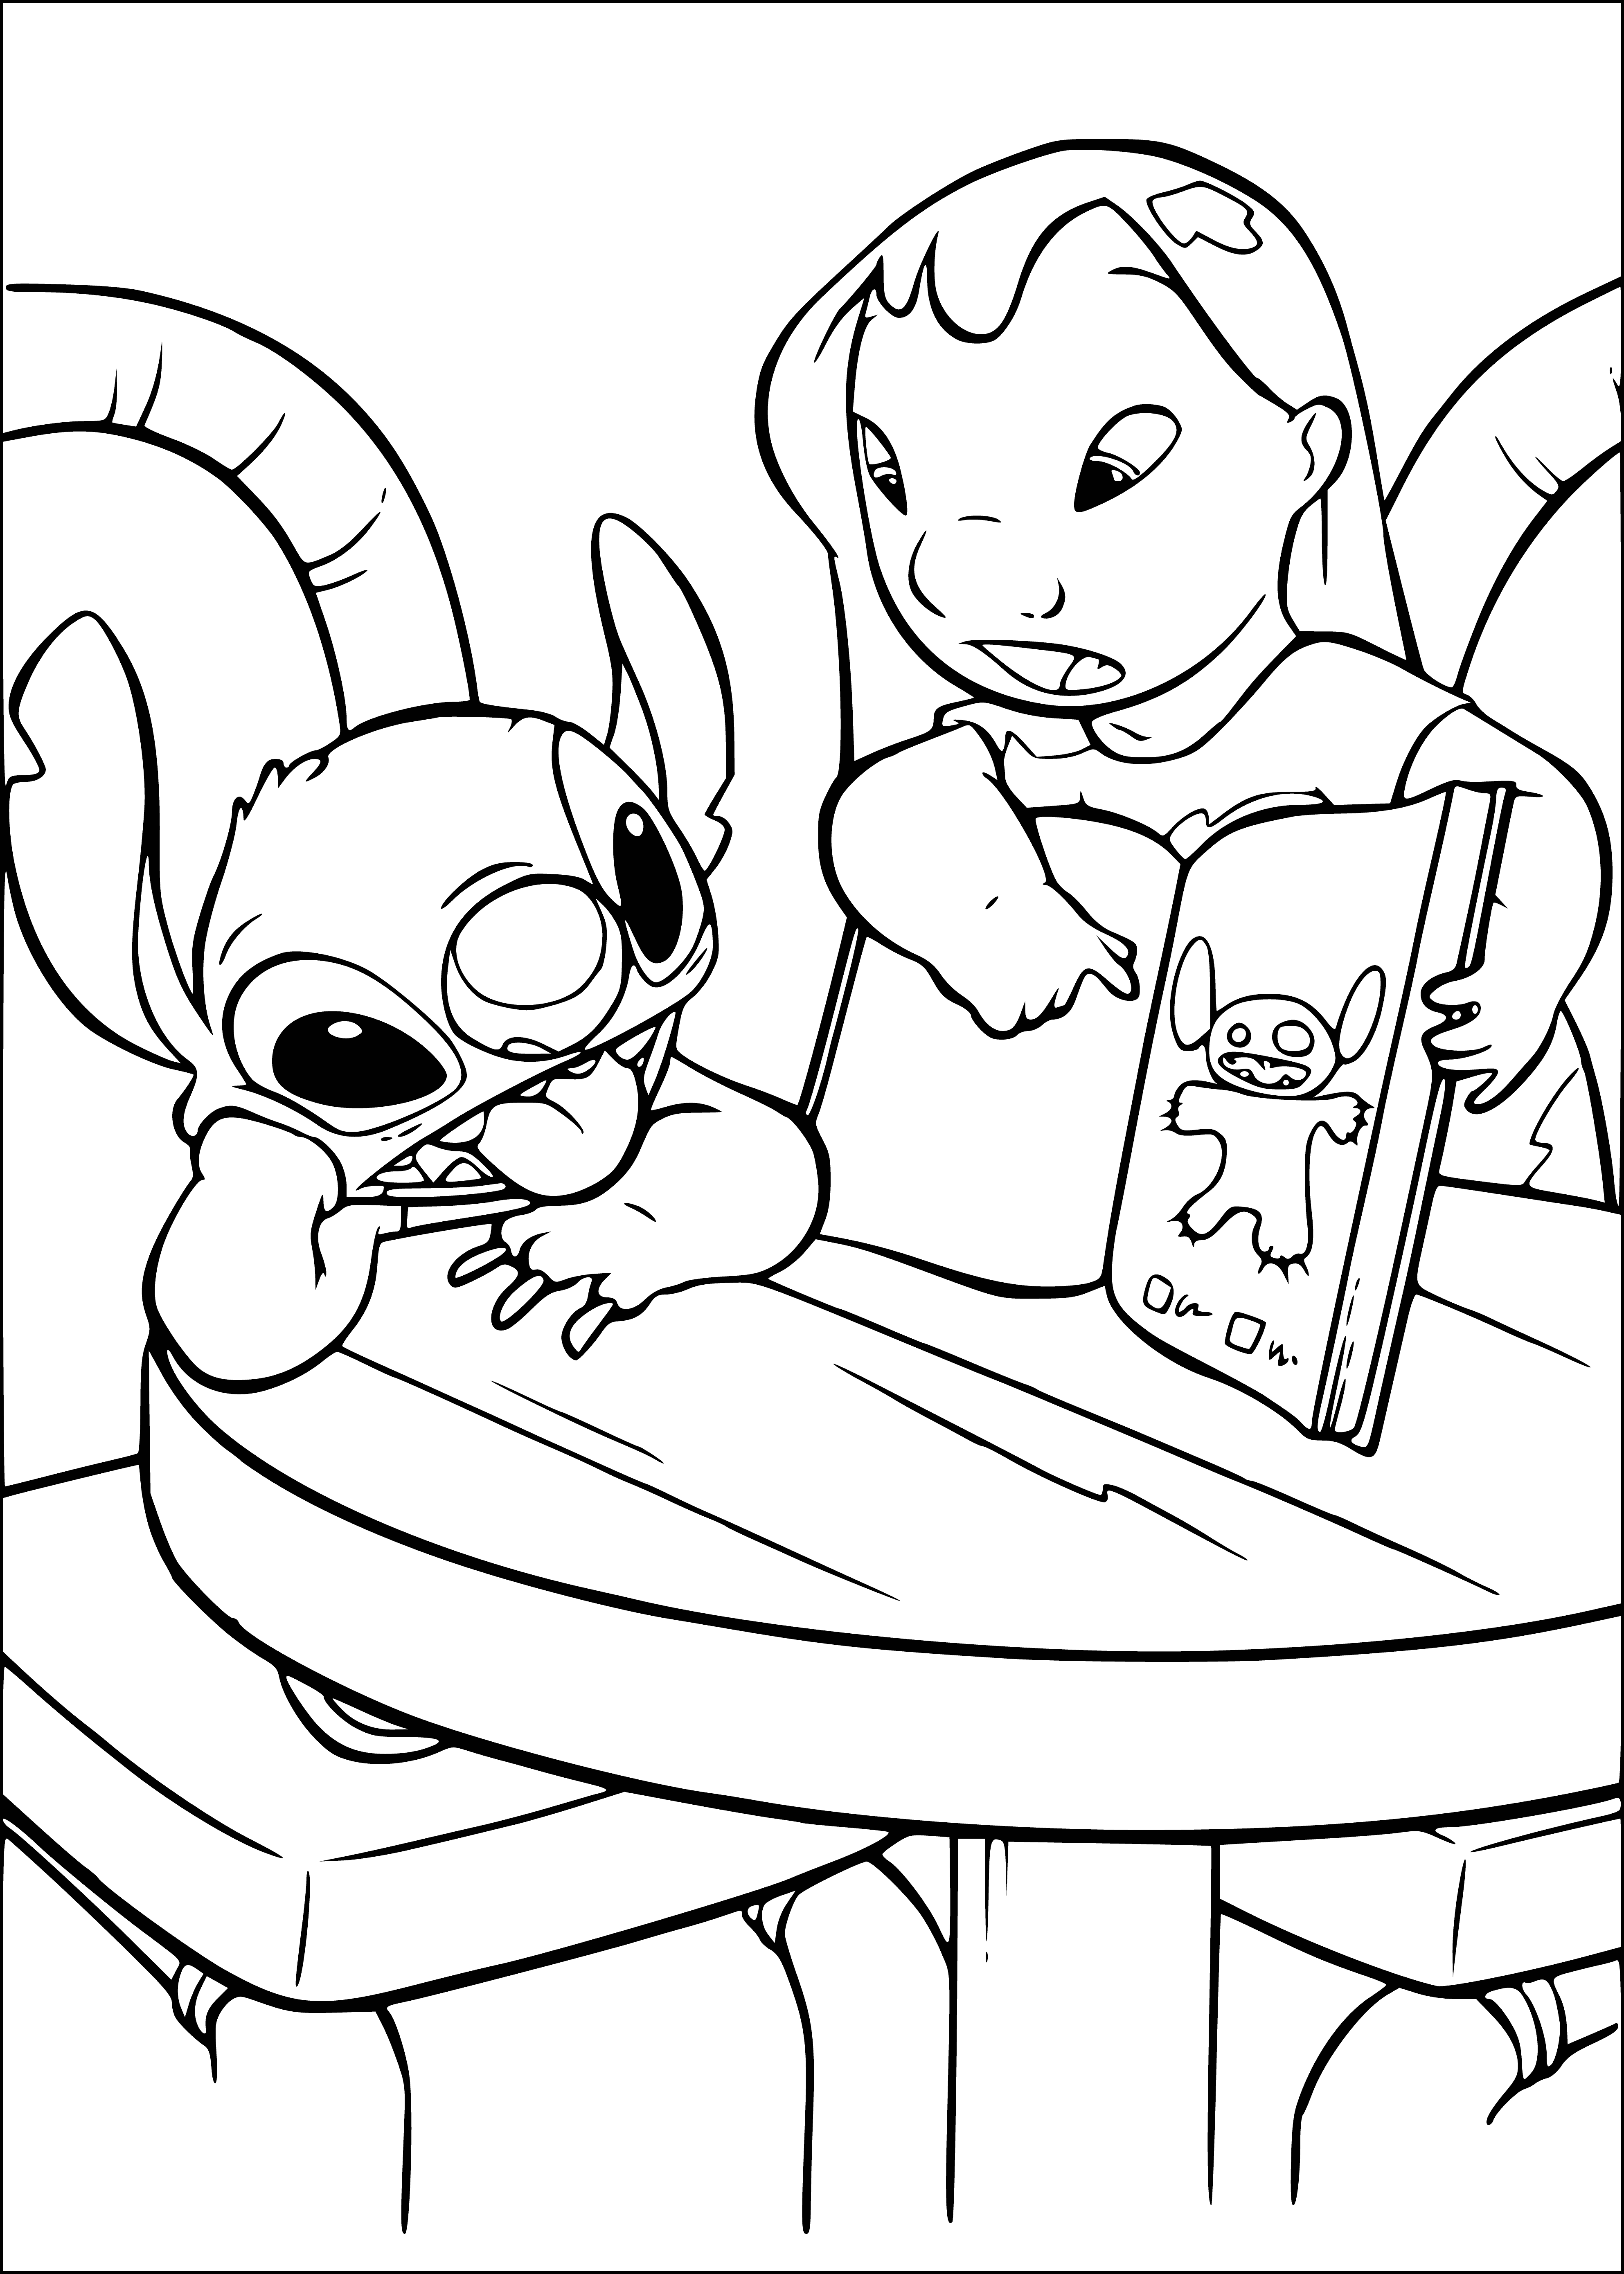 coloring page: Meter labeled "Badness Level" with pointer at "0", below says "Lilo & Stitch". #DisneyClassic